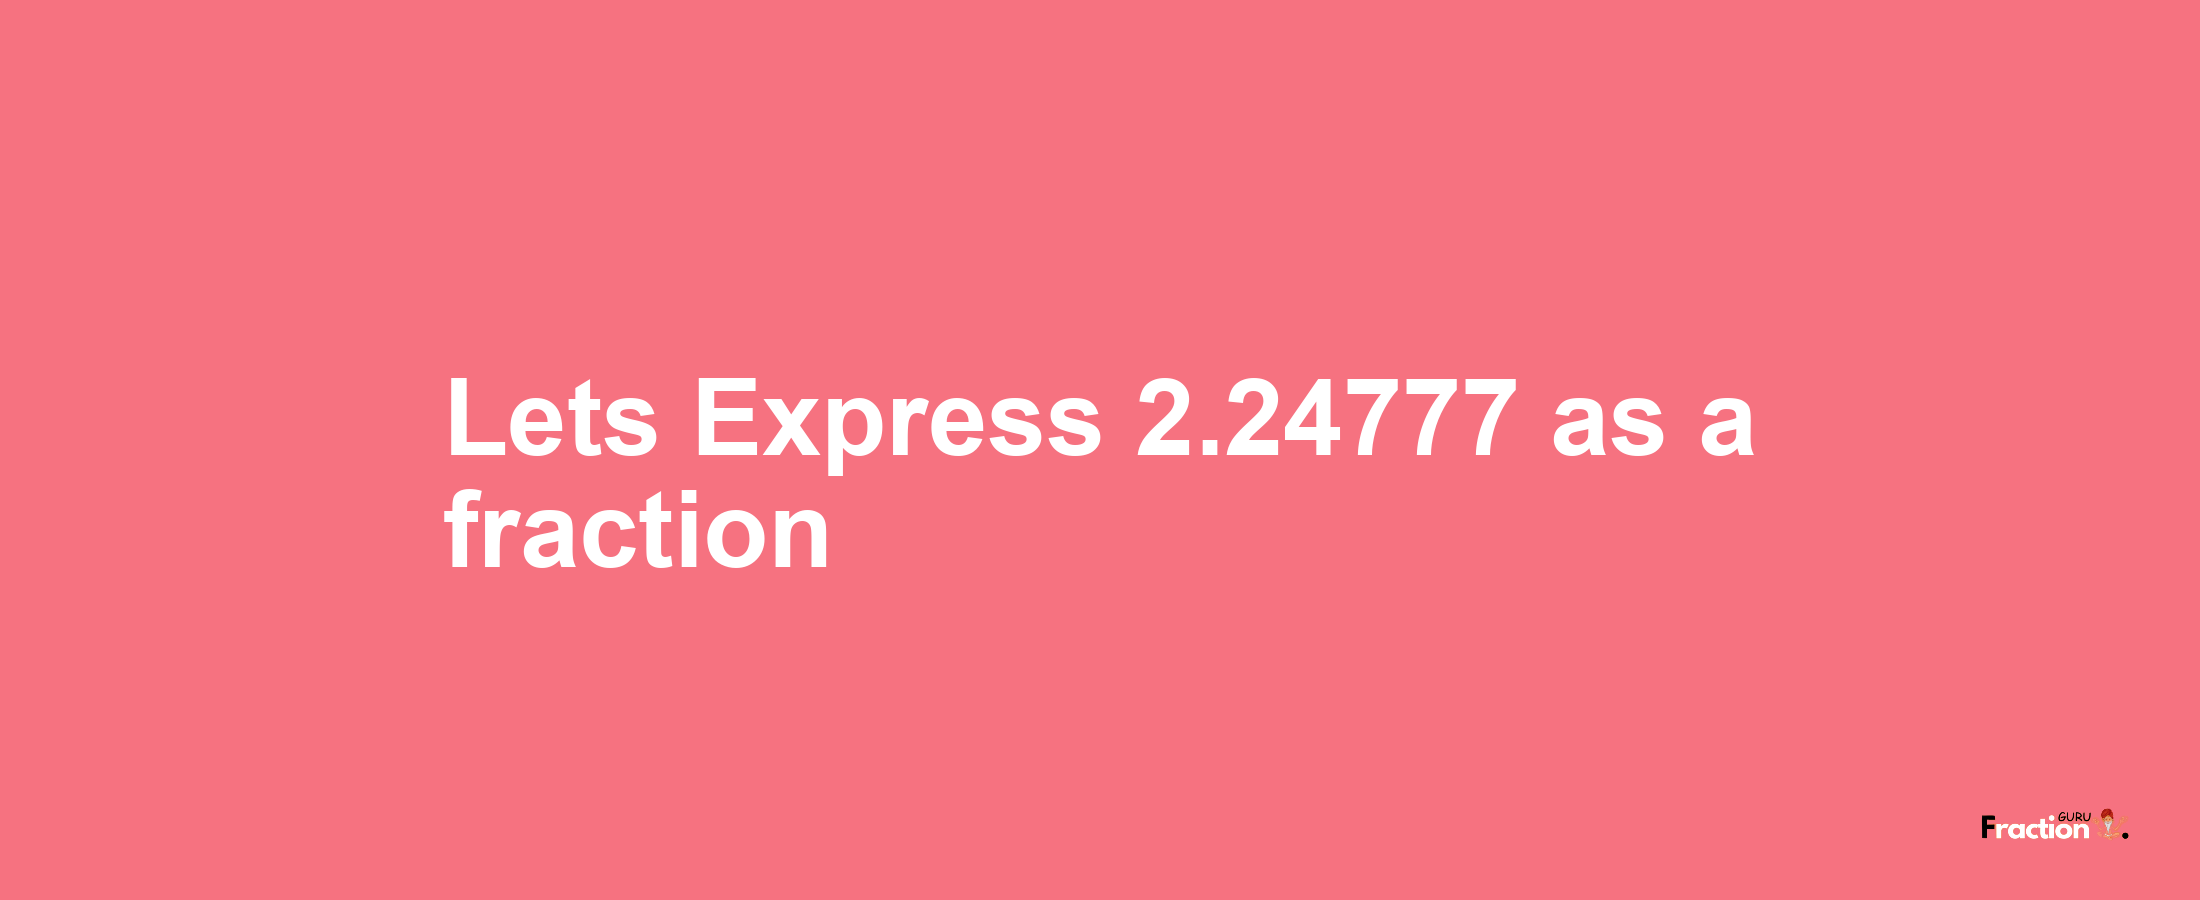 Lets Express 2.24777 as afraction